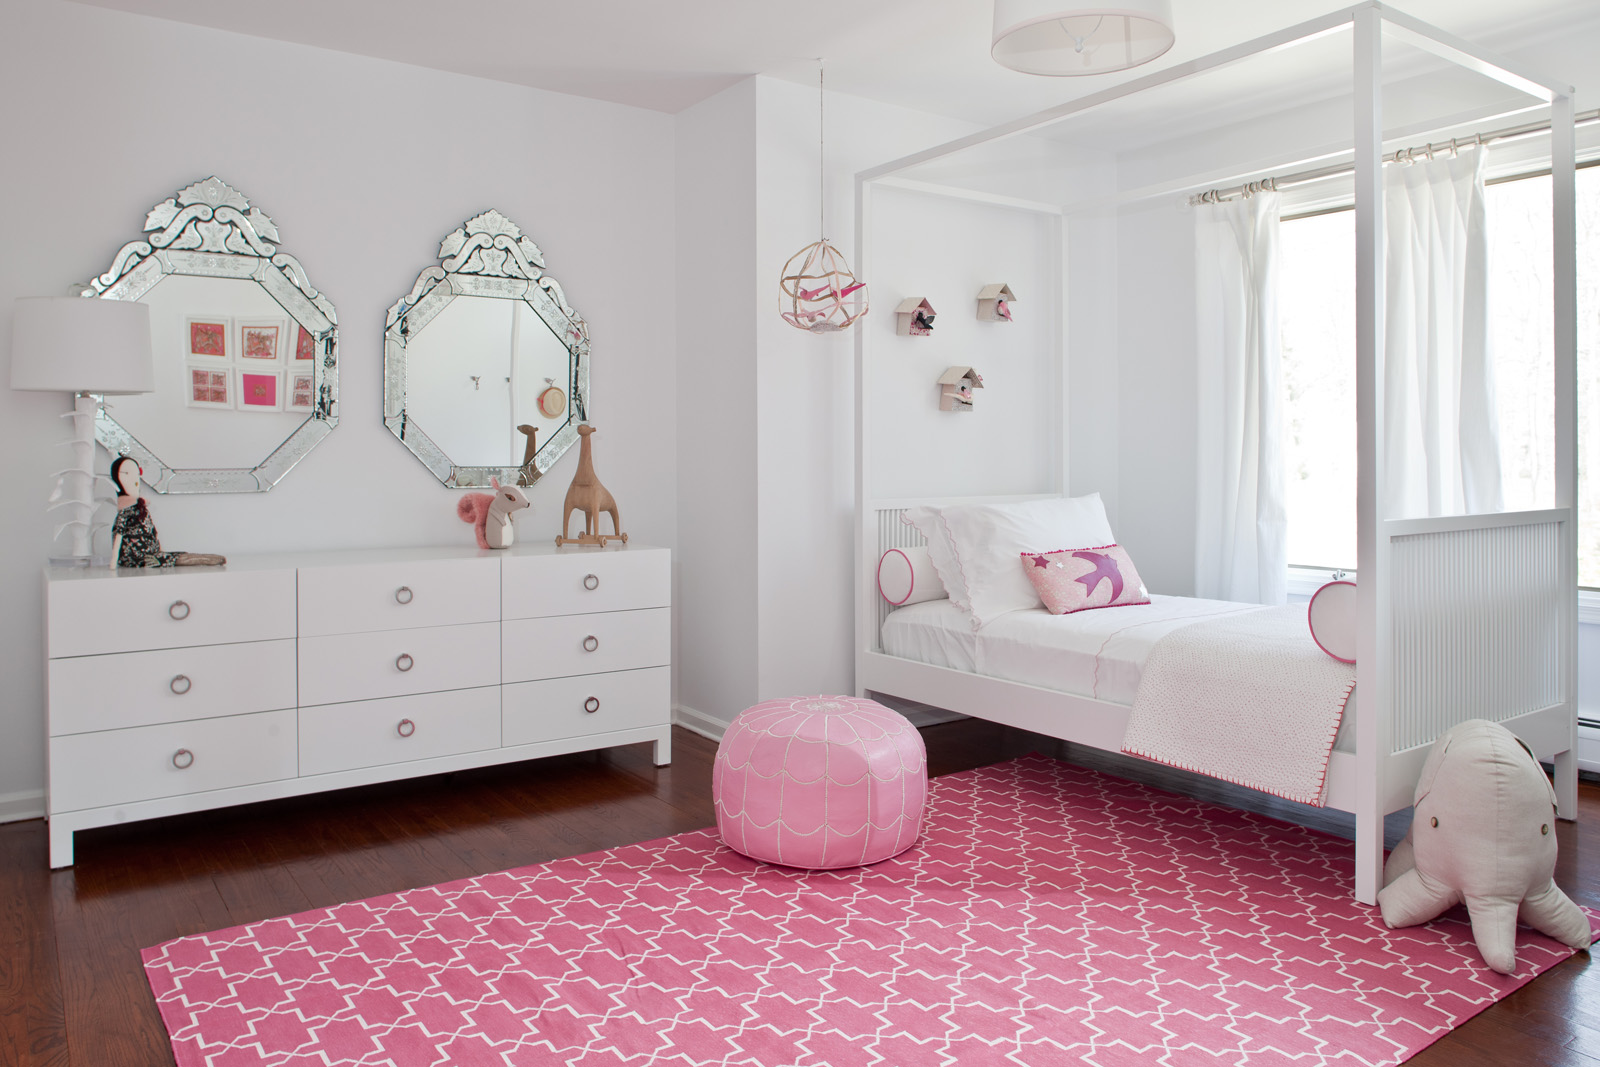 variant of a beautiful decor for a child’s room for a girl